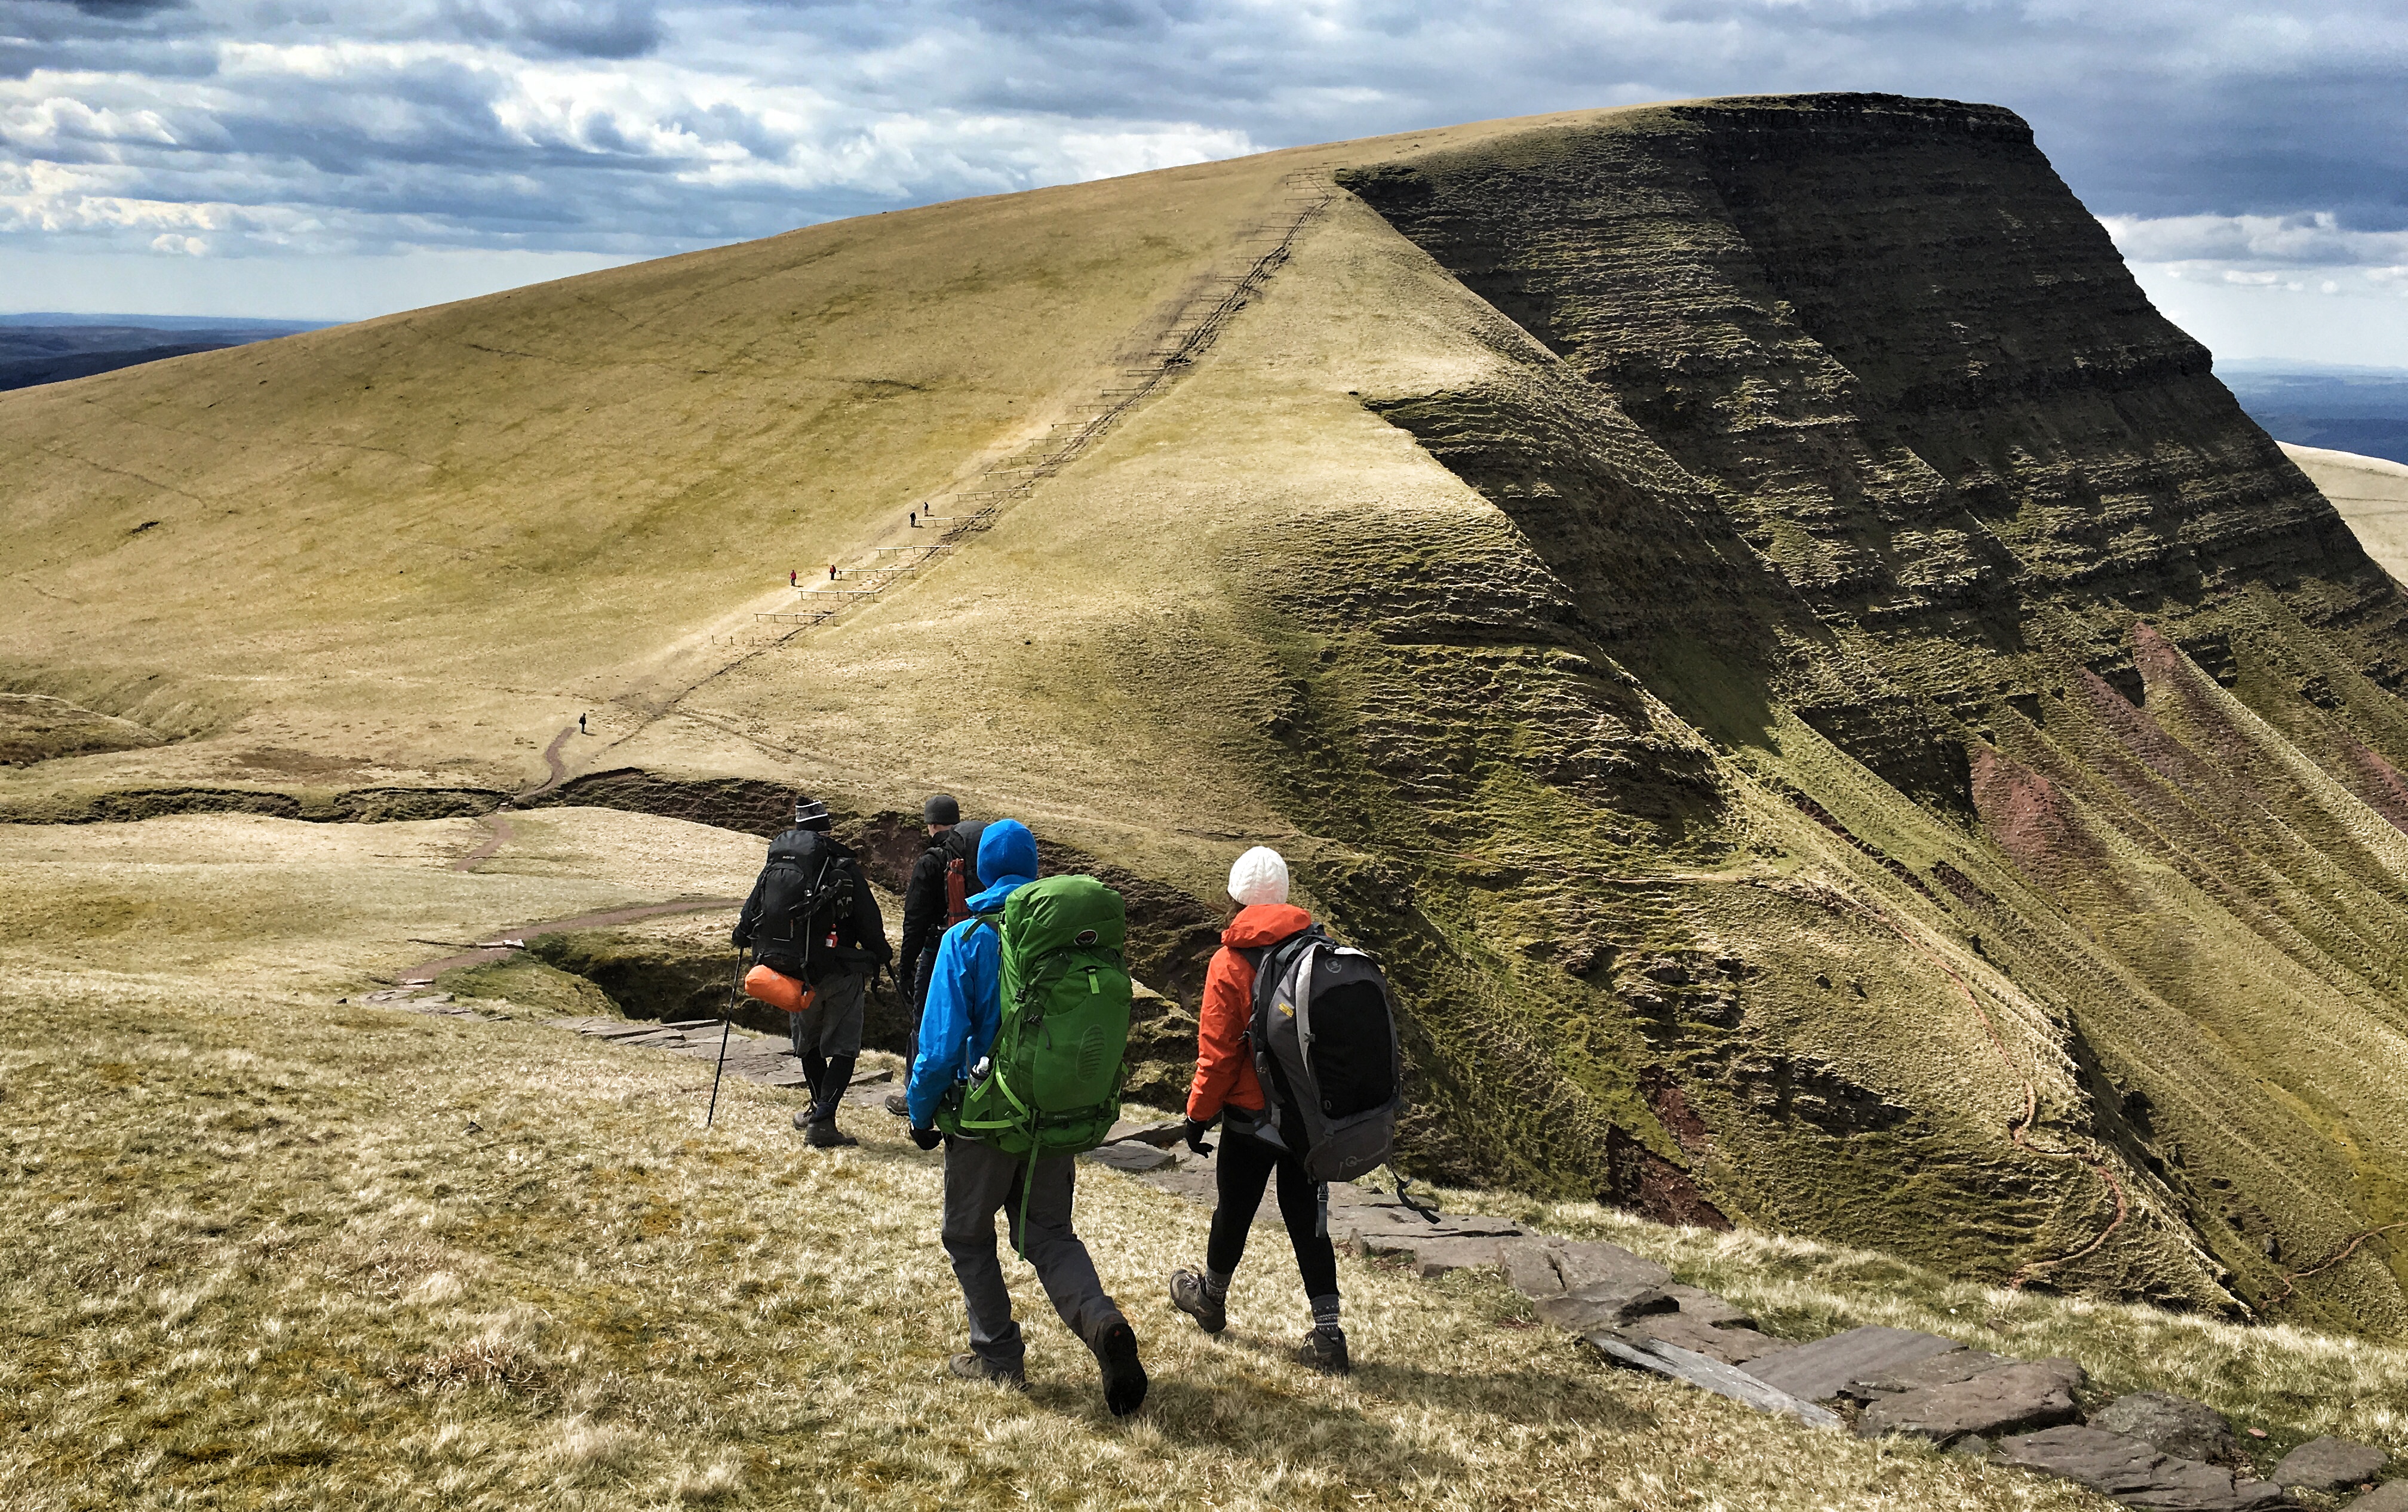 A multi-day hike through the Brecon Beacons